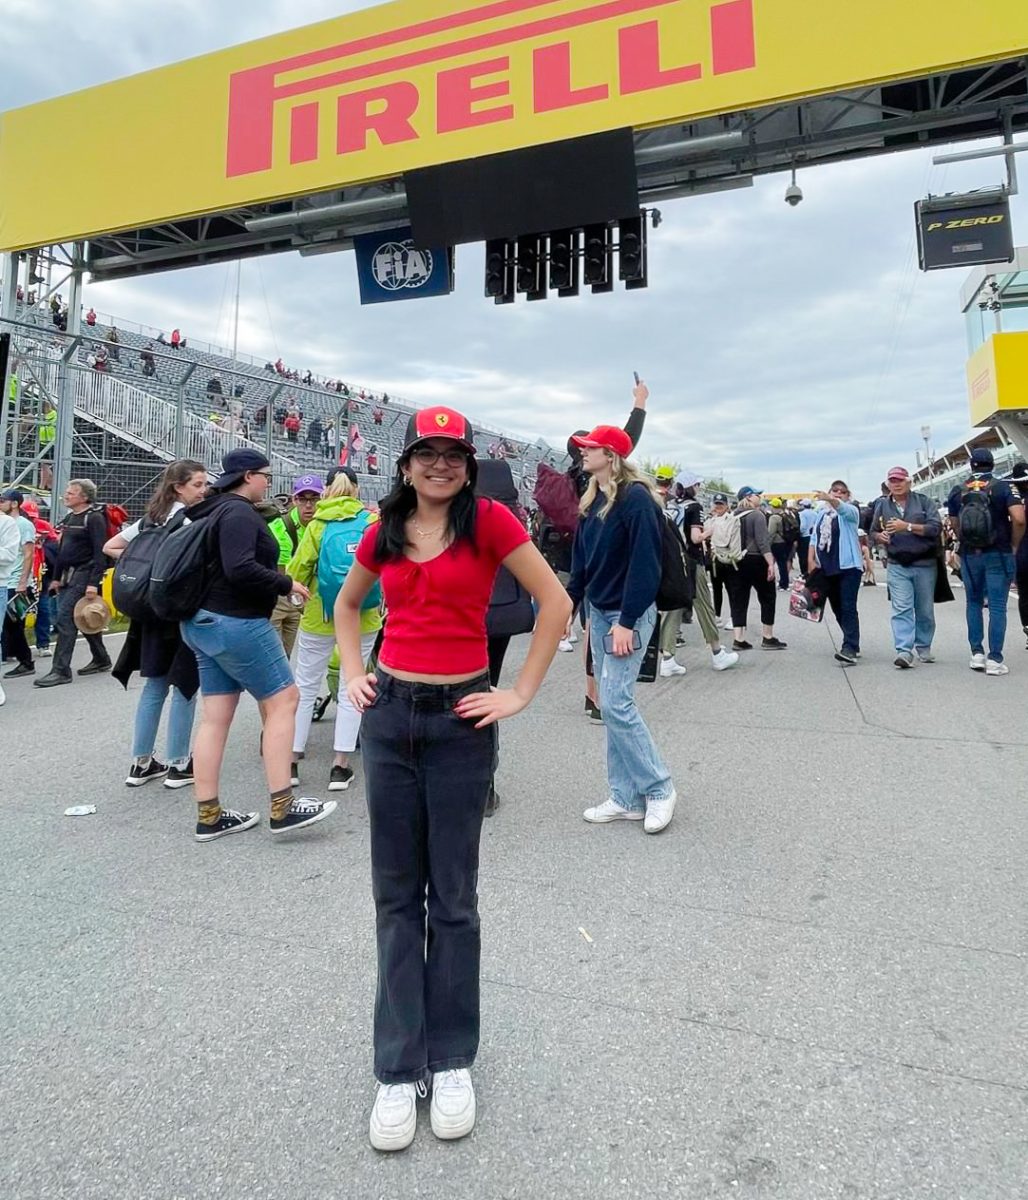 Monika Mukerji at the 2023 Formula One Canadian Grand Prix. She described it as one of the most amazing experiences of her life.